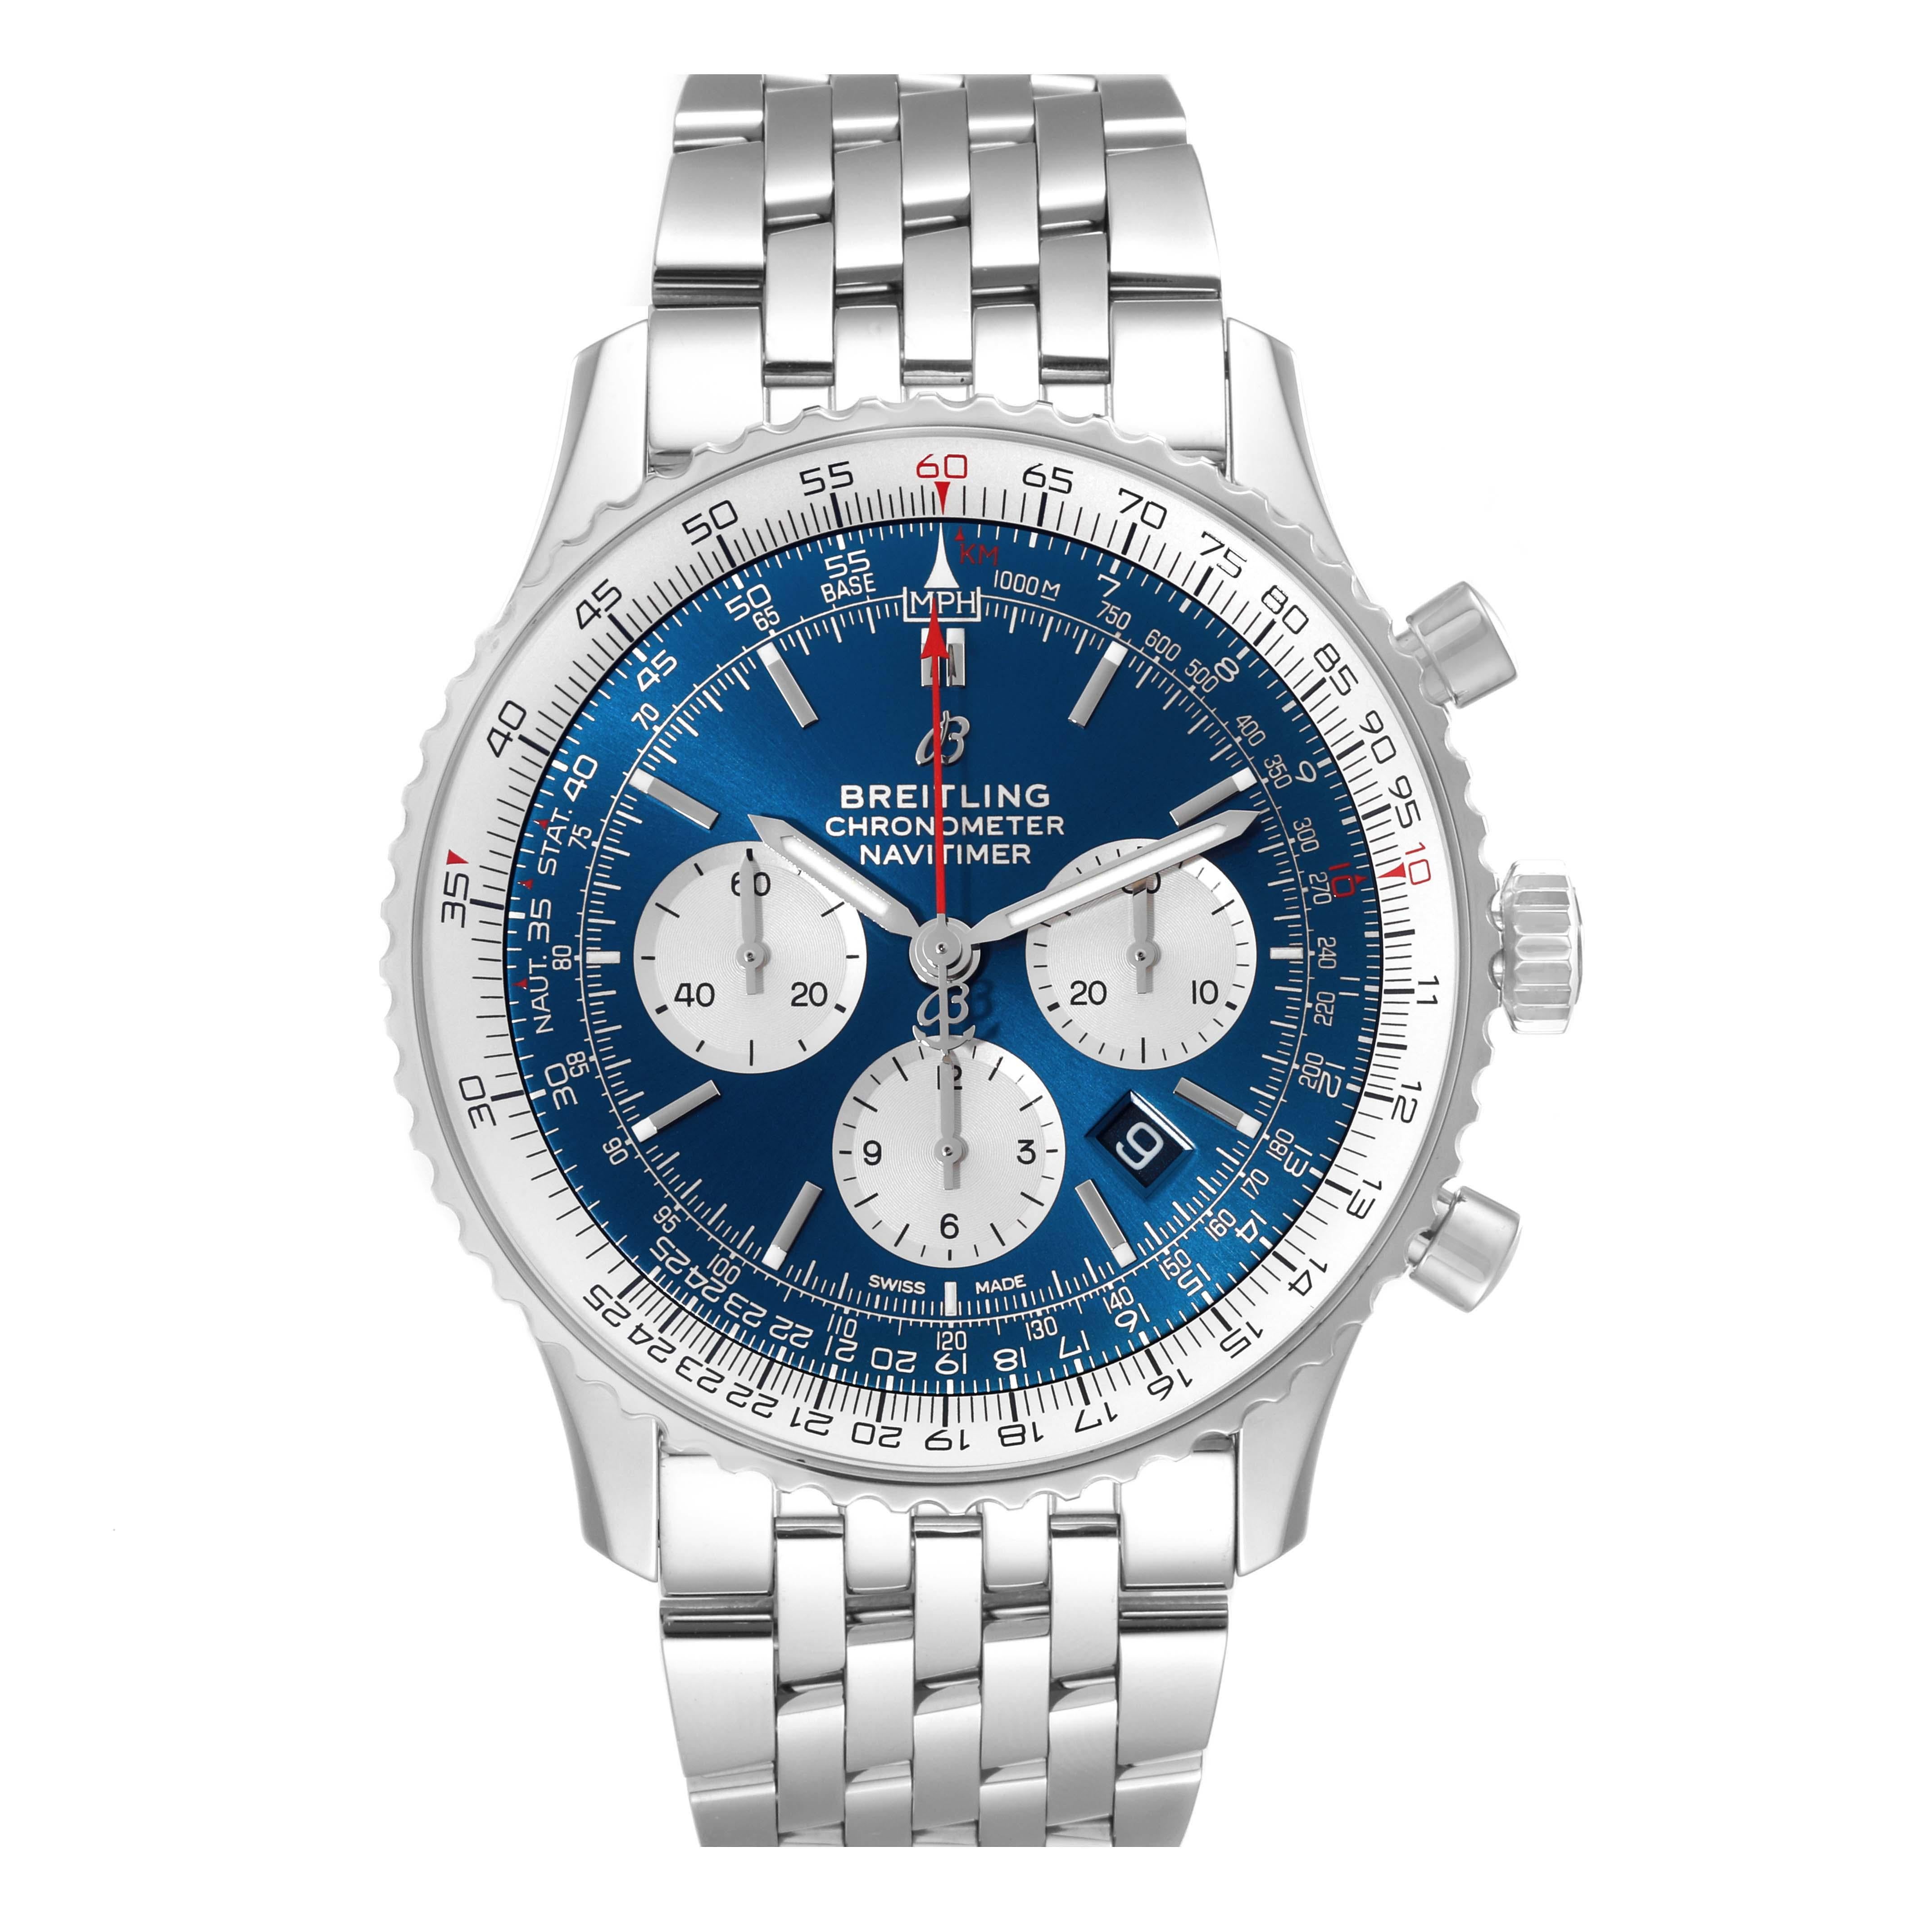 Breitling Navitimer 01 46mm Aurora Blue Dial Steel Mens Watch AB0127 Box Card. Self-winding automatic officially certified chronometer movement. Chronograph function. Stainless steel case 46.0 mm in diameter. Case thickness 14.50 mm. Transparent